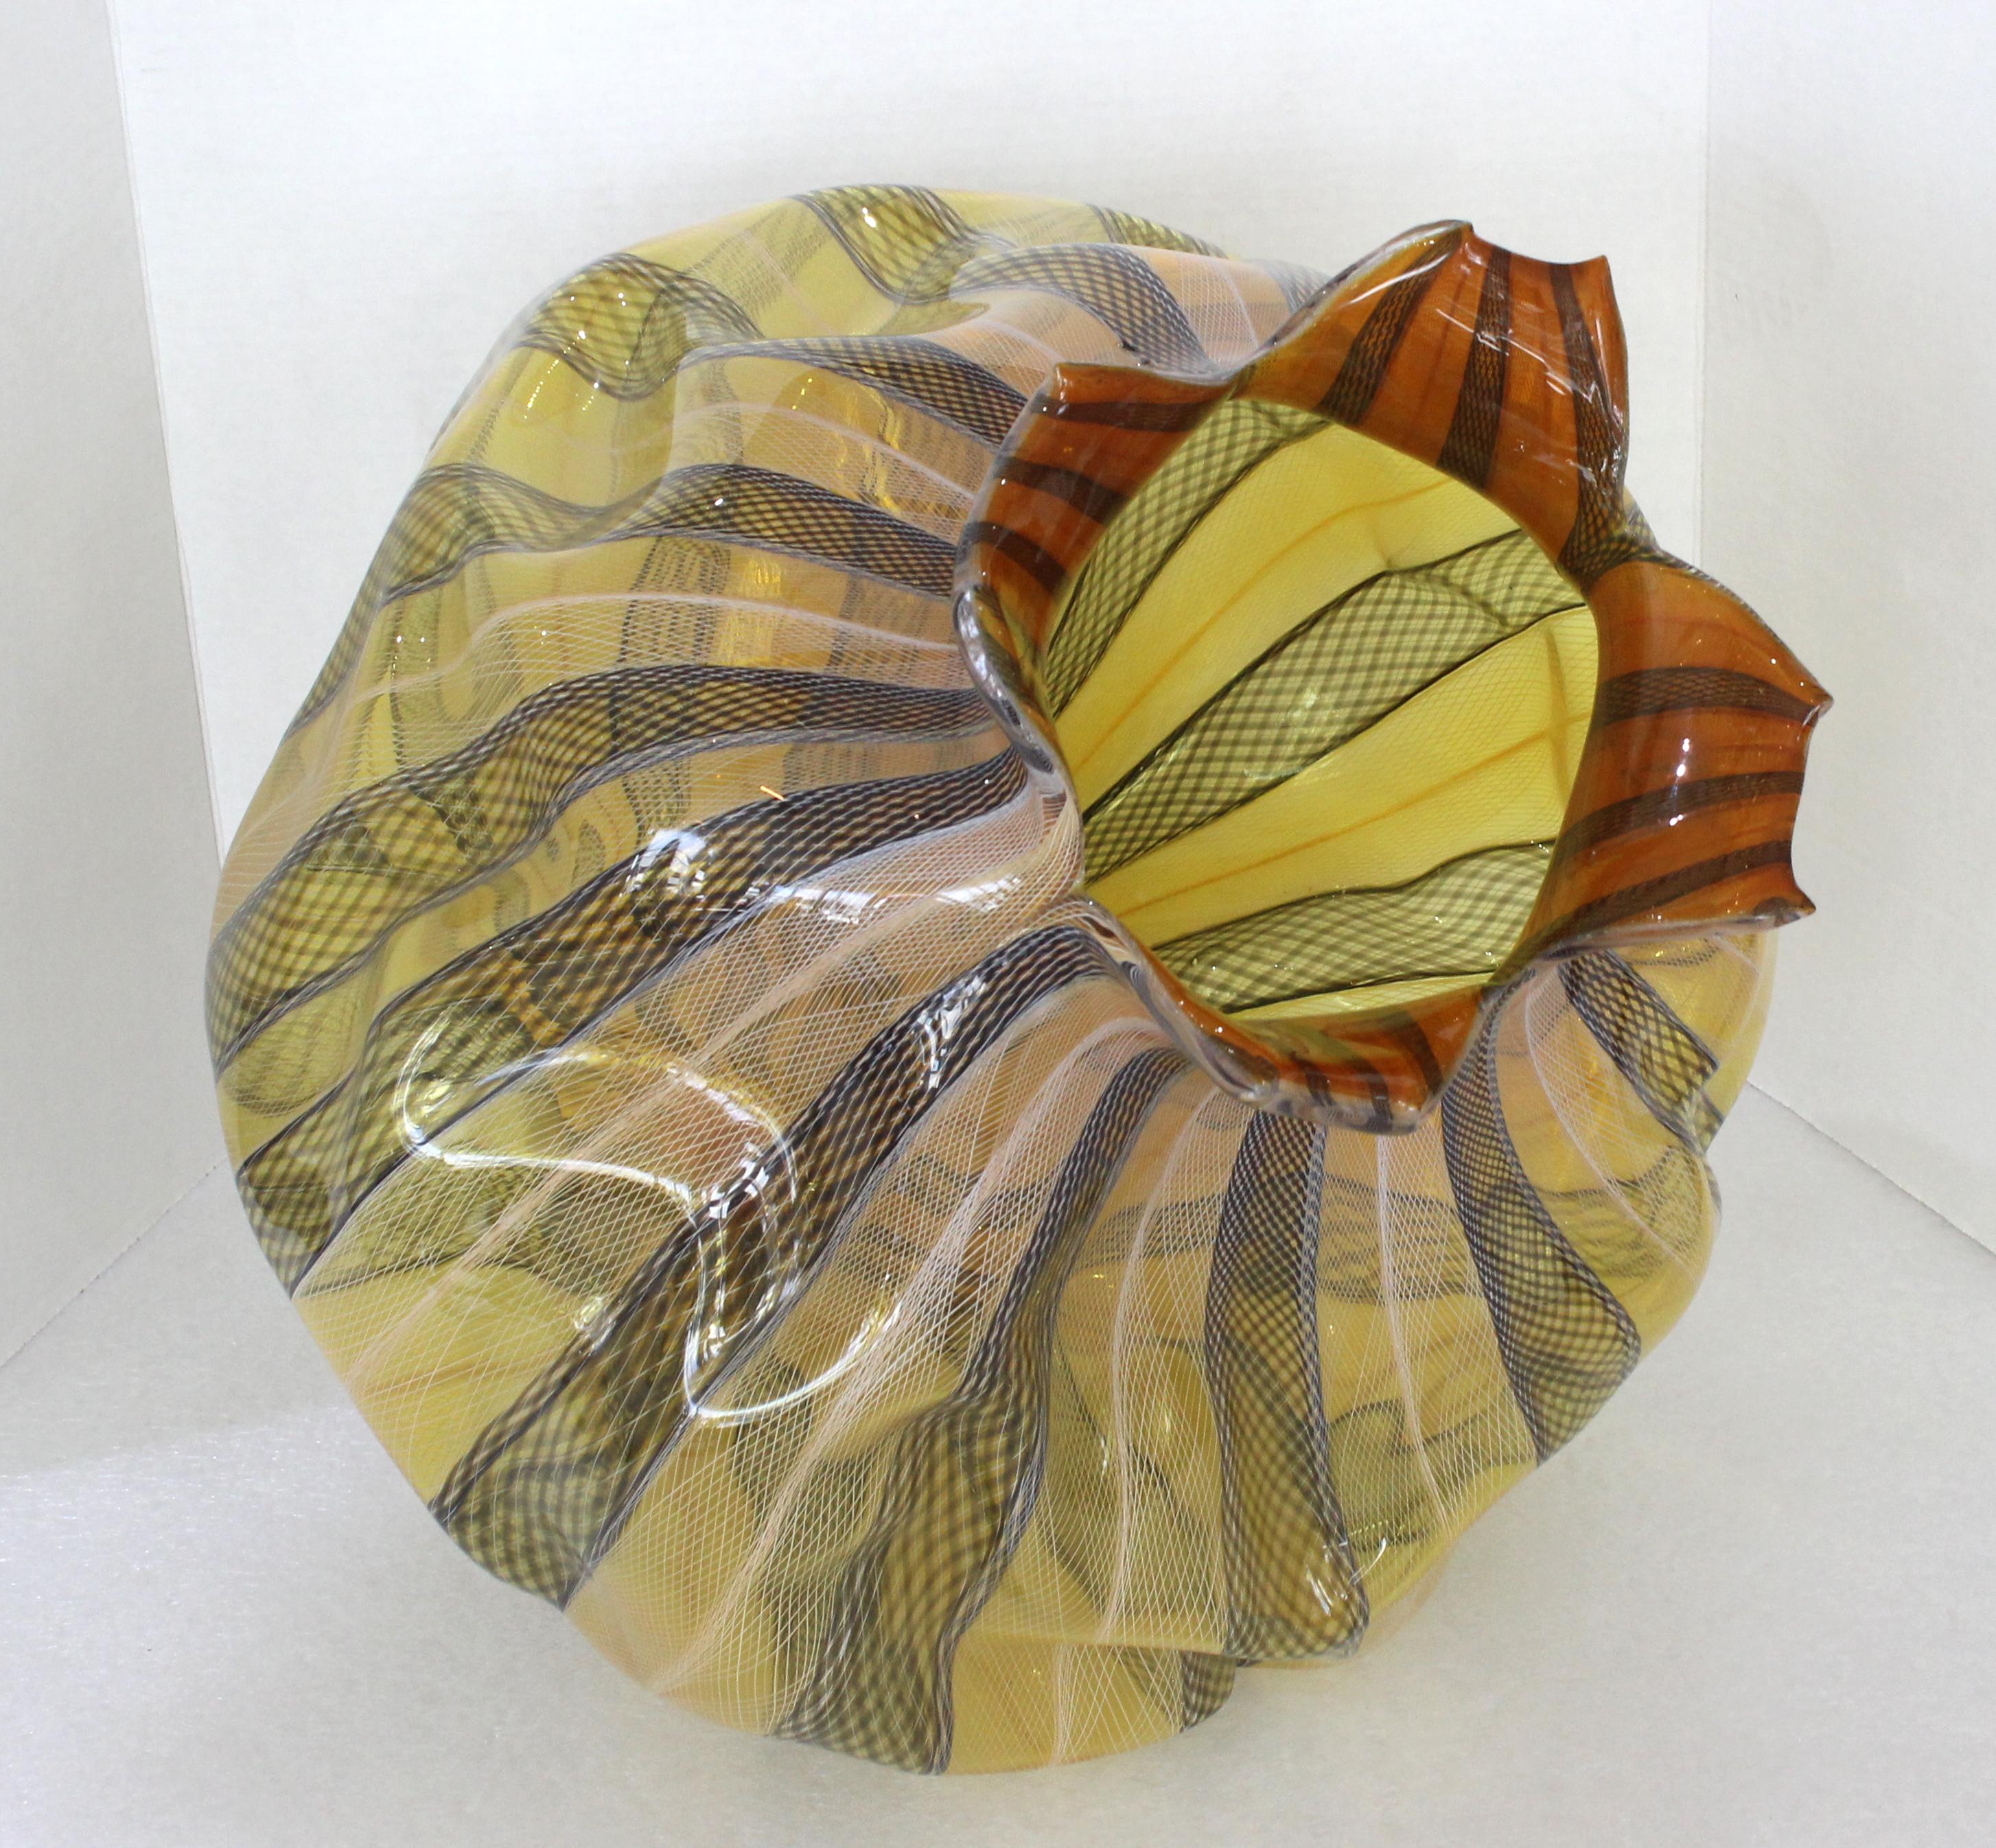 This large scale artisan glass vase is very much in the manner of pieces created by the Pilchuk Glassworks.